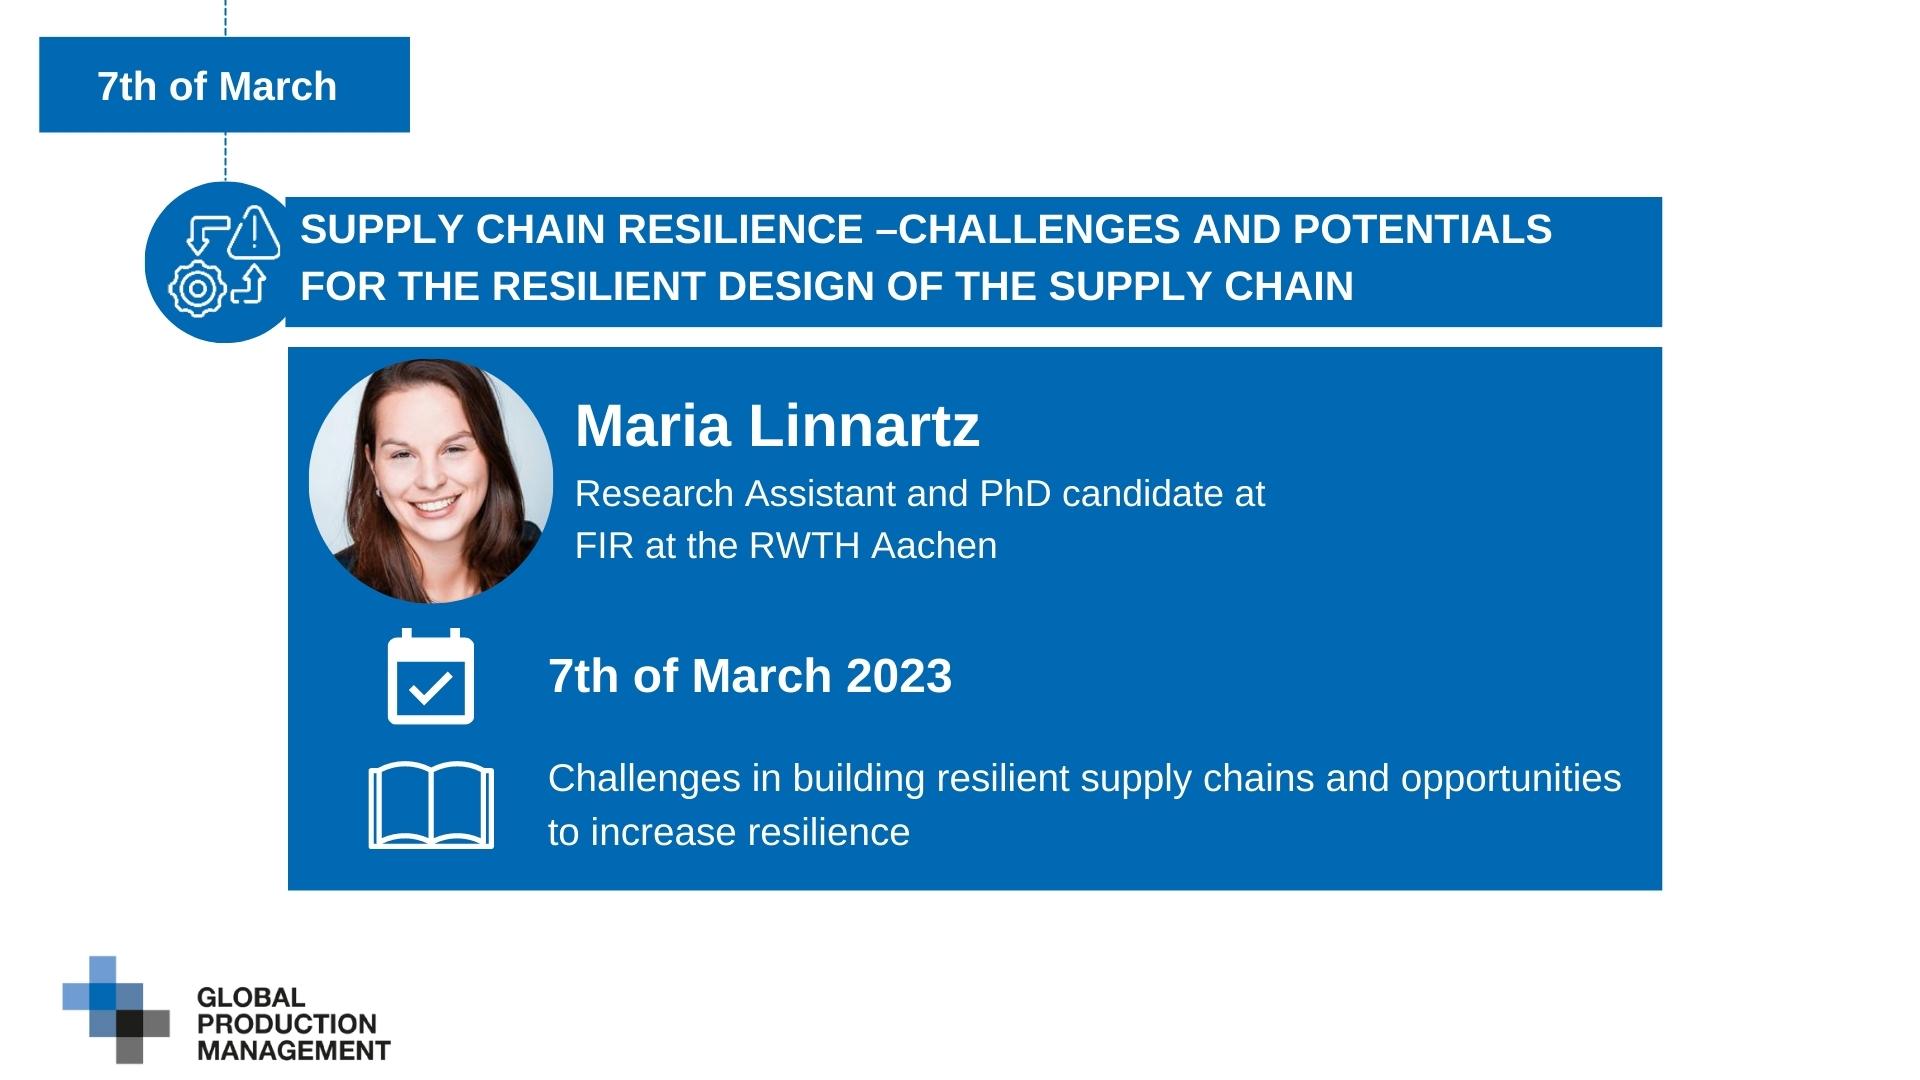 2 Supply Chain Resilience - Challenges and Potentials for the resilient Design of the Supply Chain  